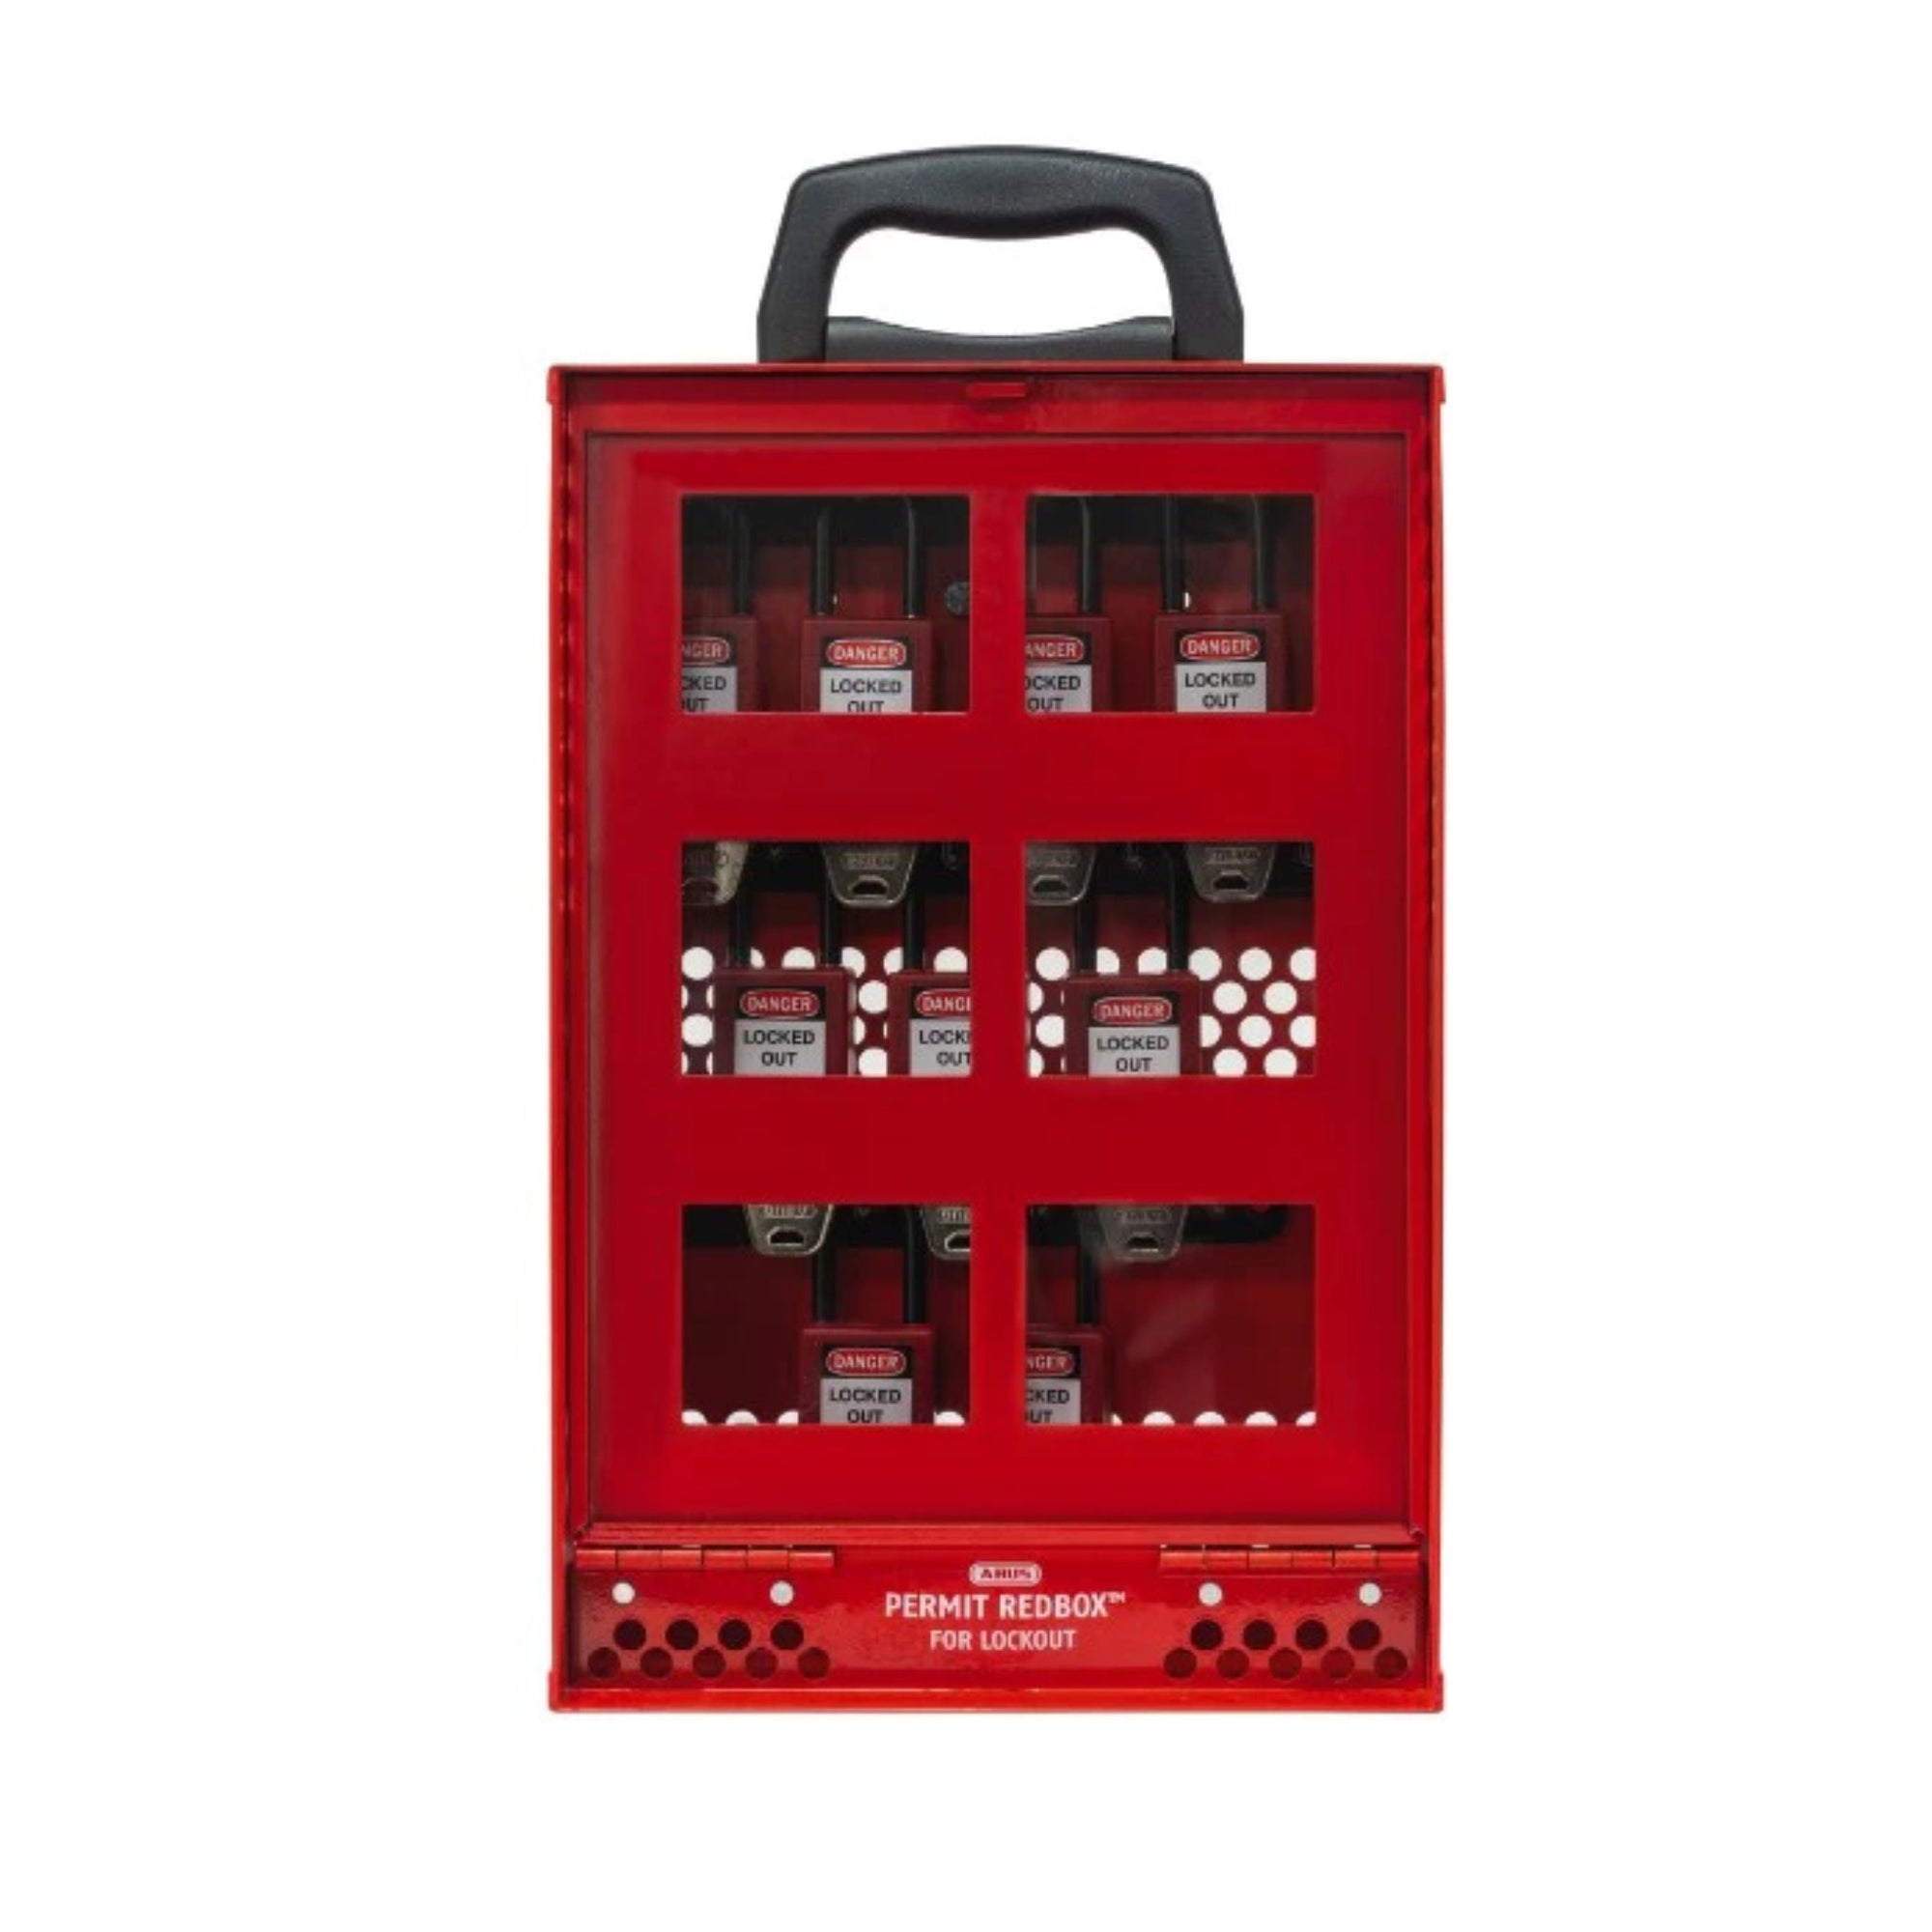 Abus B810 Red Permit Redbox Permit-to-Work Cabinet for Lockout Tagout Applications - The Lock Source